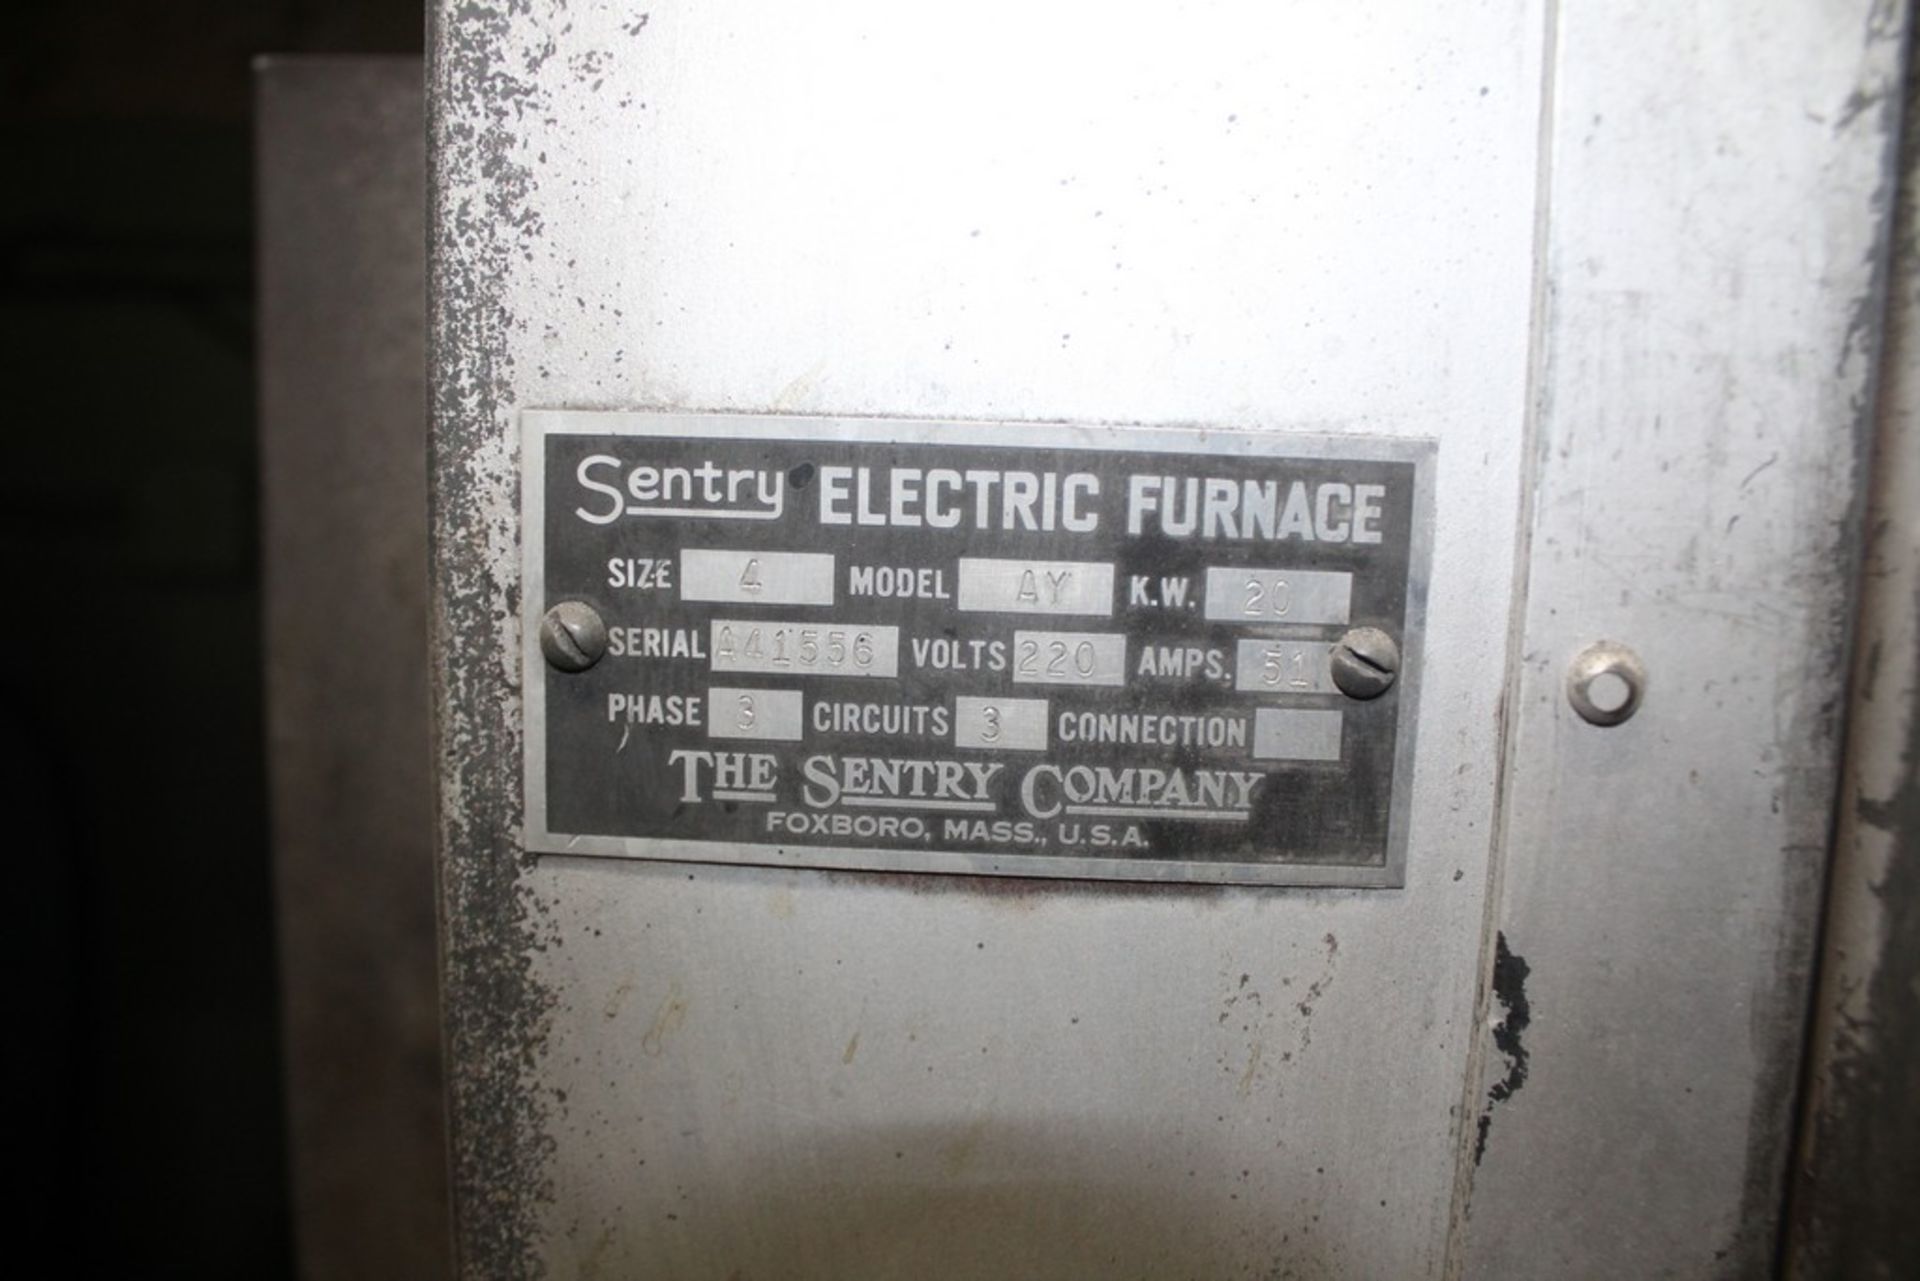 SENTRY 20 KW SIZE 4 MODEL AY ELECTRIC FURNACE, S/N A41556 - Image 4 of 4